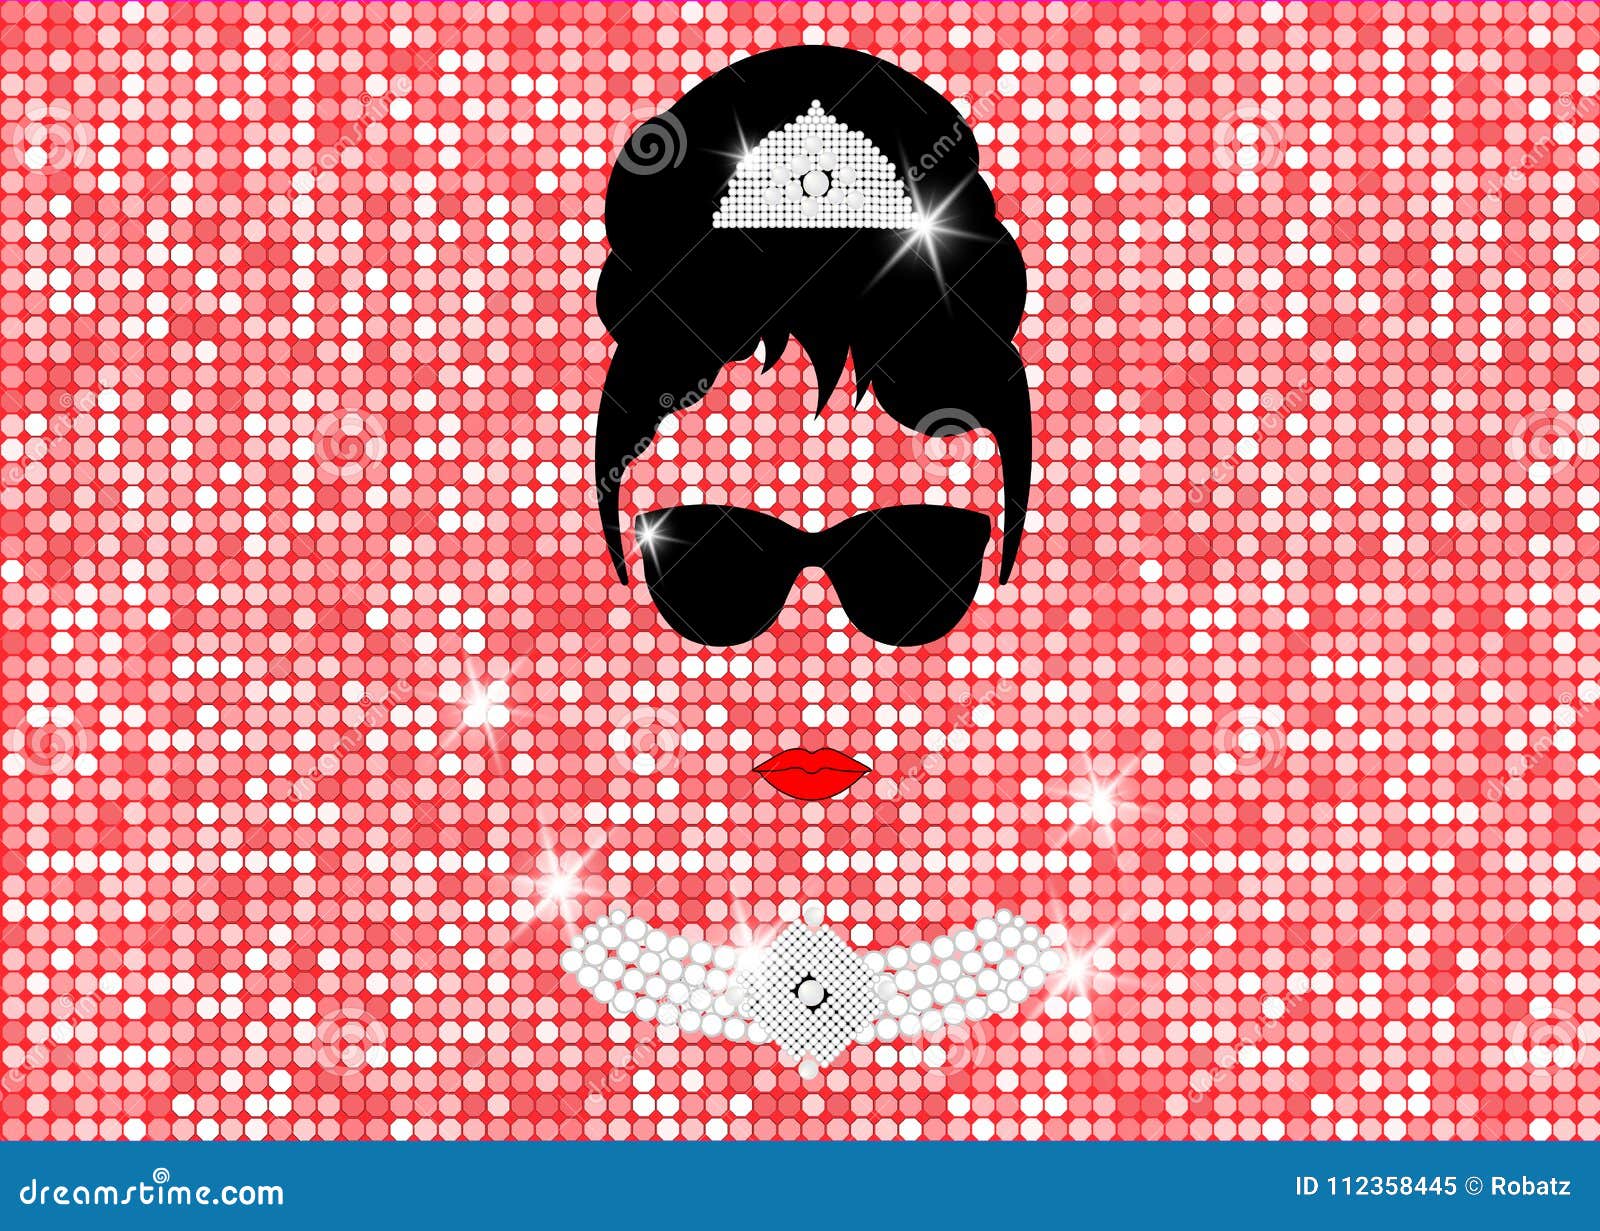 117 Audrey Hepburn Sunglasses Stock Photos - Free & Royalty-Free Stock  Photos from Dreamstime